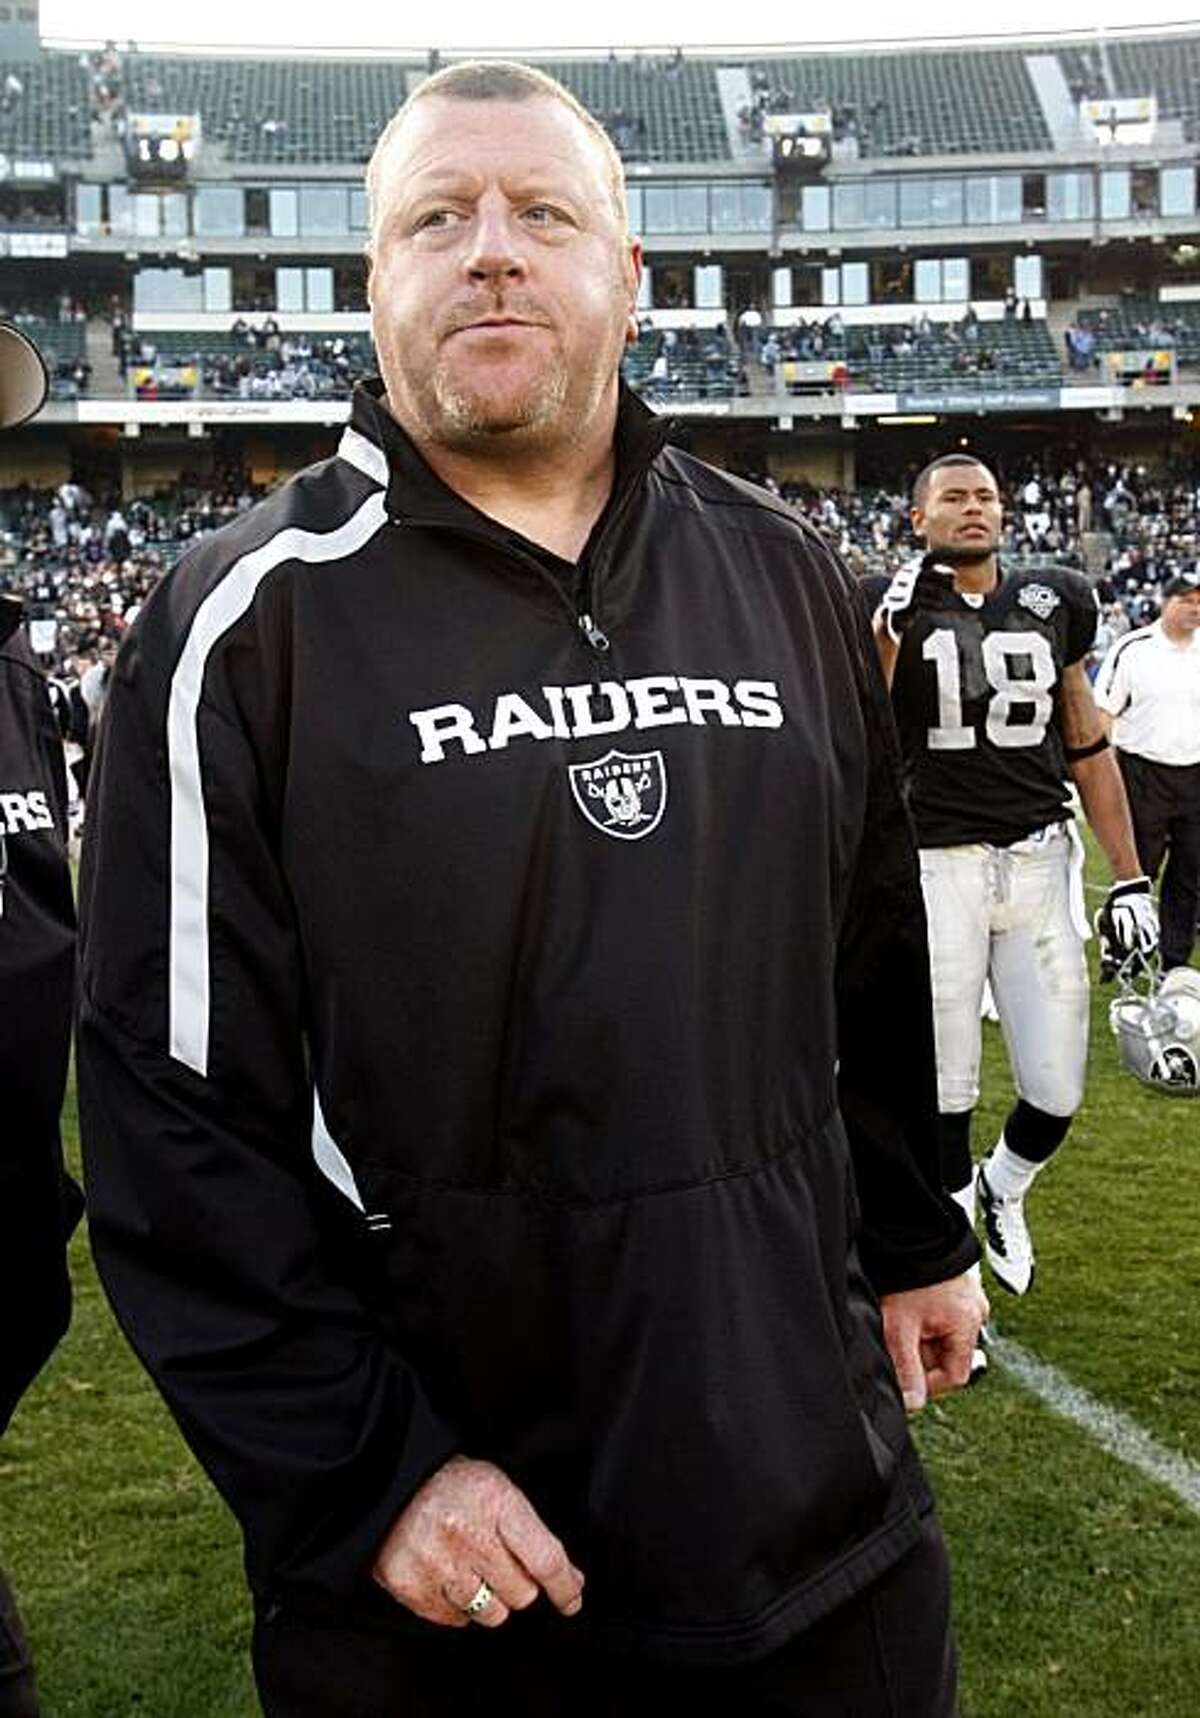 Oakland Raiders head coach Tom Cable walks off the field after an NFL football game against the Baltimore Ravens in Oakland, Calif., Sunday, Jan. 3, 2010. The Ravens won 21-13. (AP Photo/Paul Sakuma)